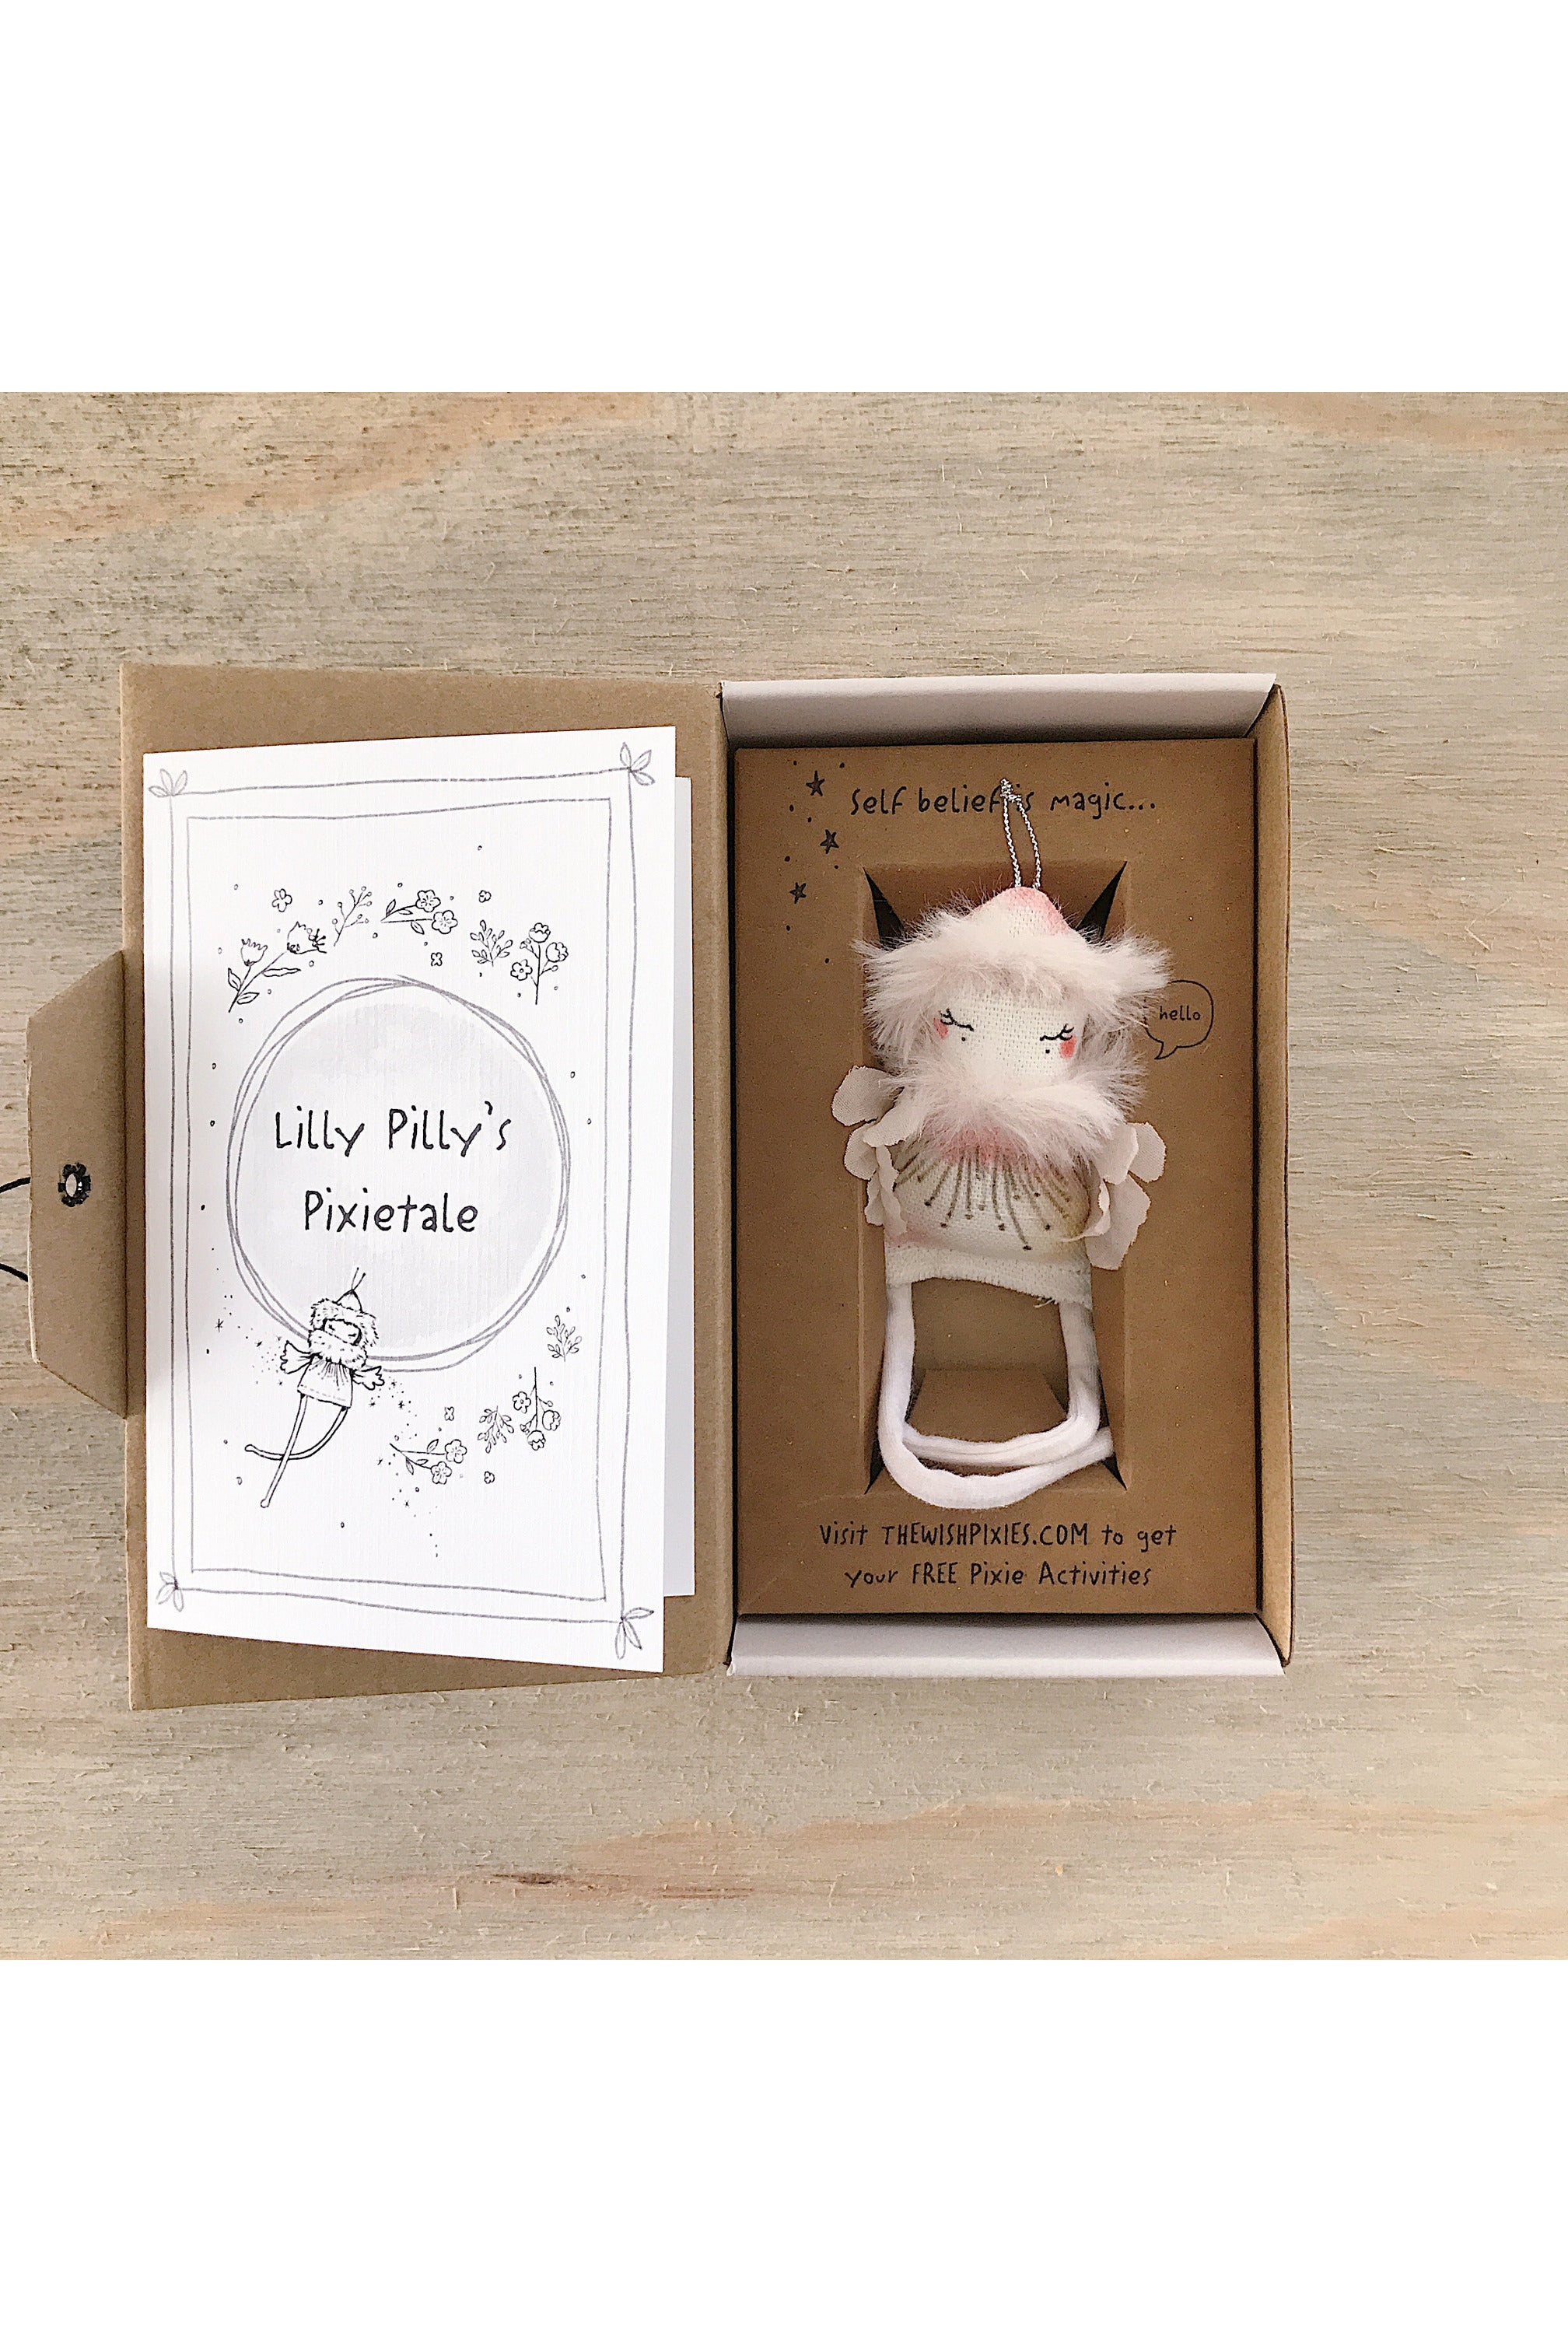 Lilly Pilly Wish Pixie - For Kindness